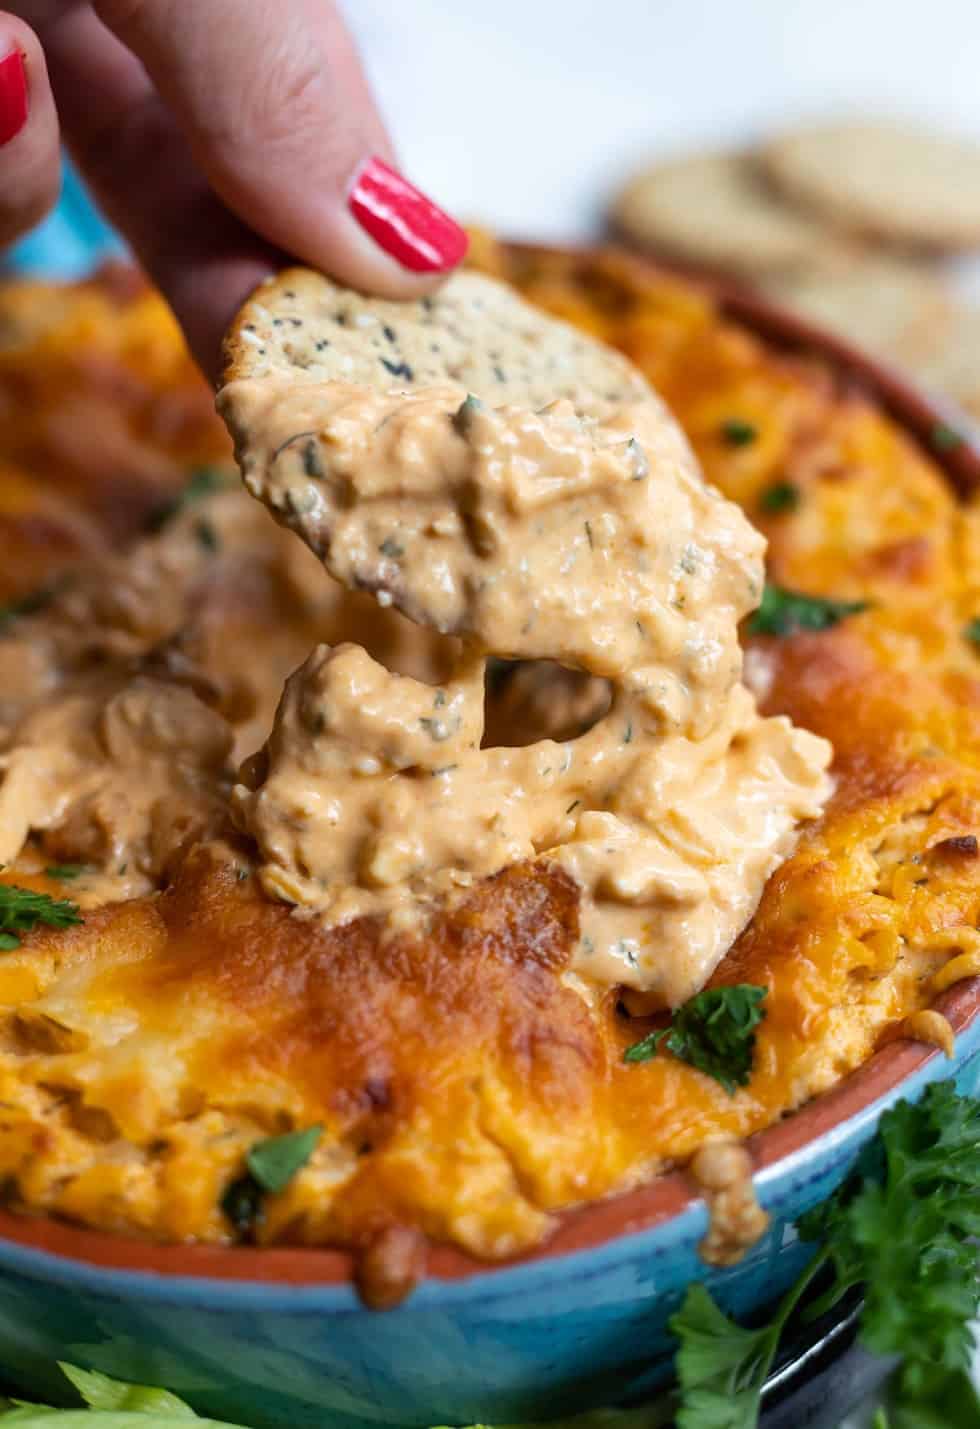 A cracker being dipped into a bowl of buffalo chicken dip.